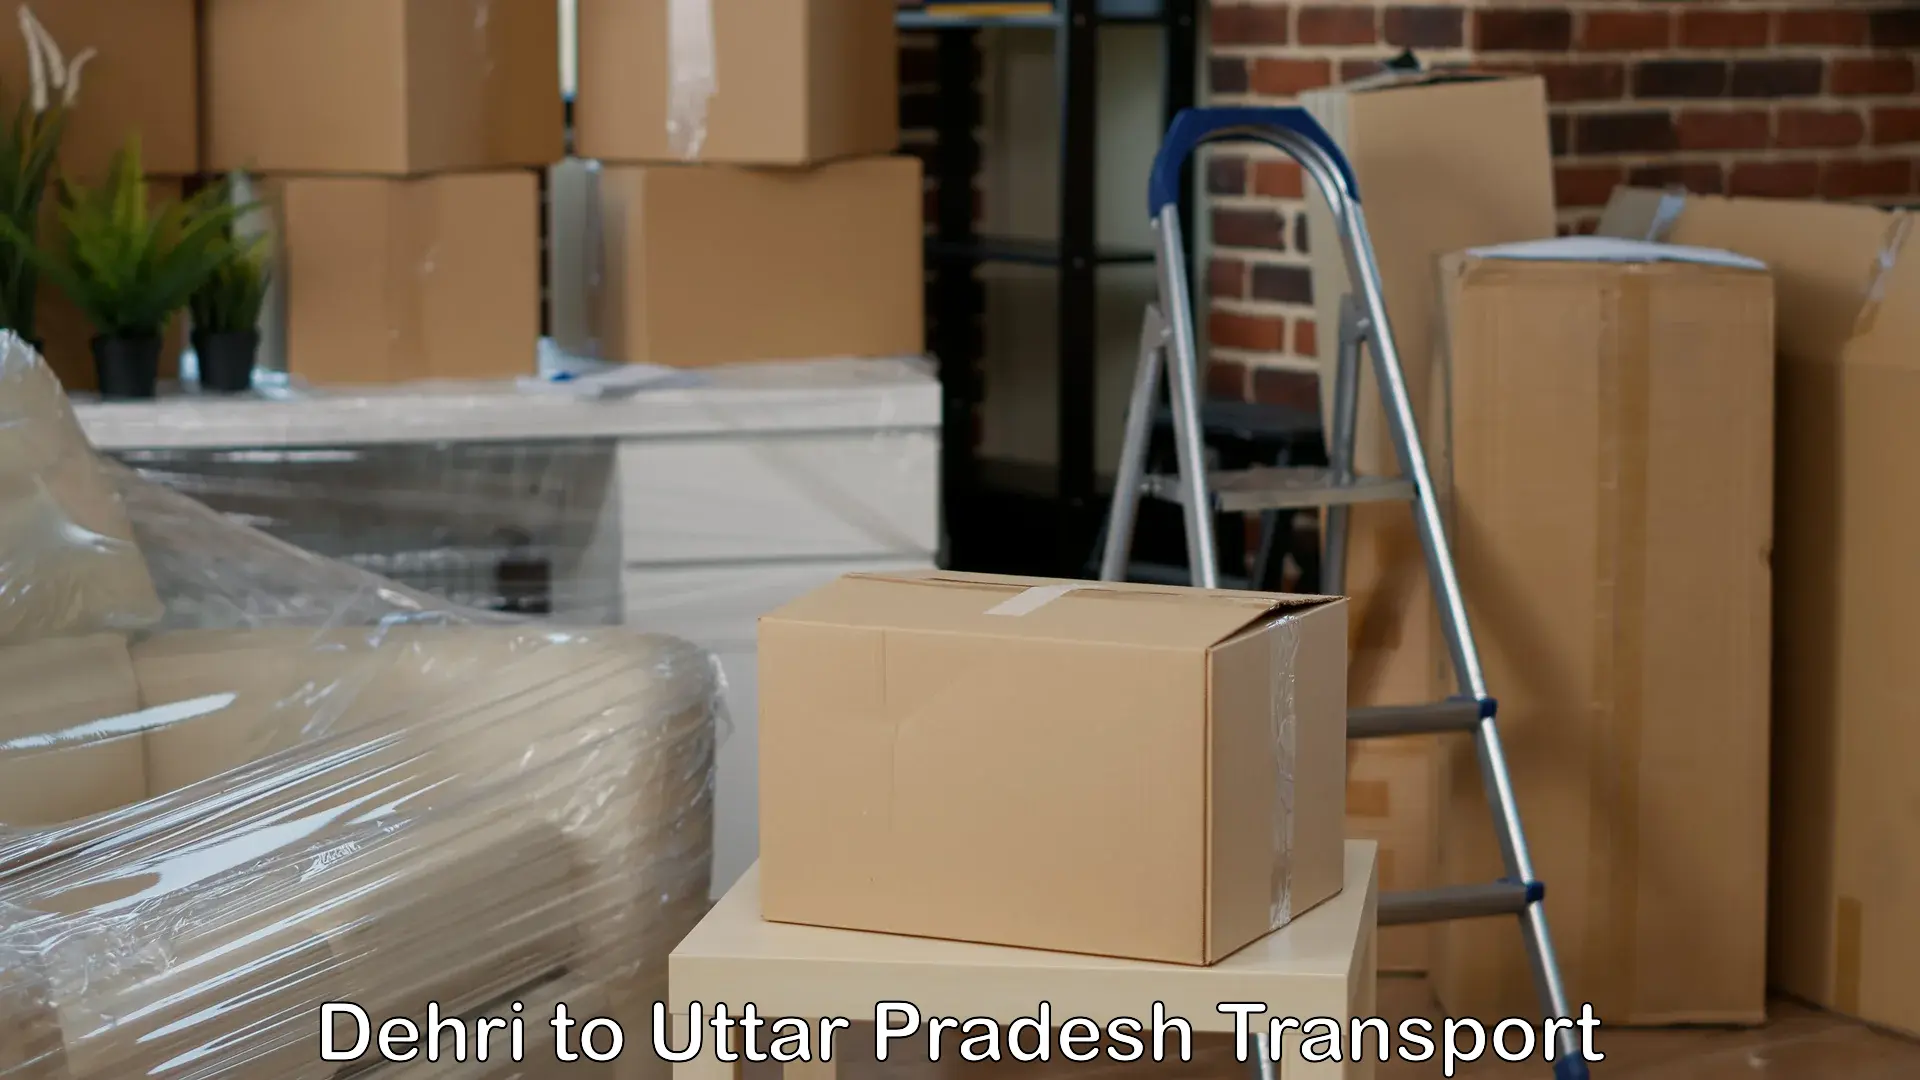 Container transportation services in Dehri to Allahabad